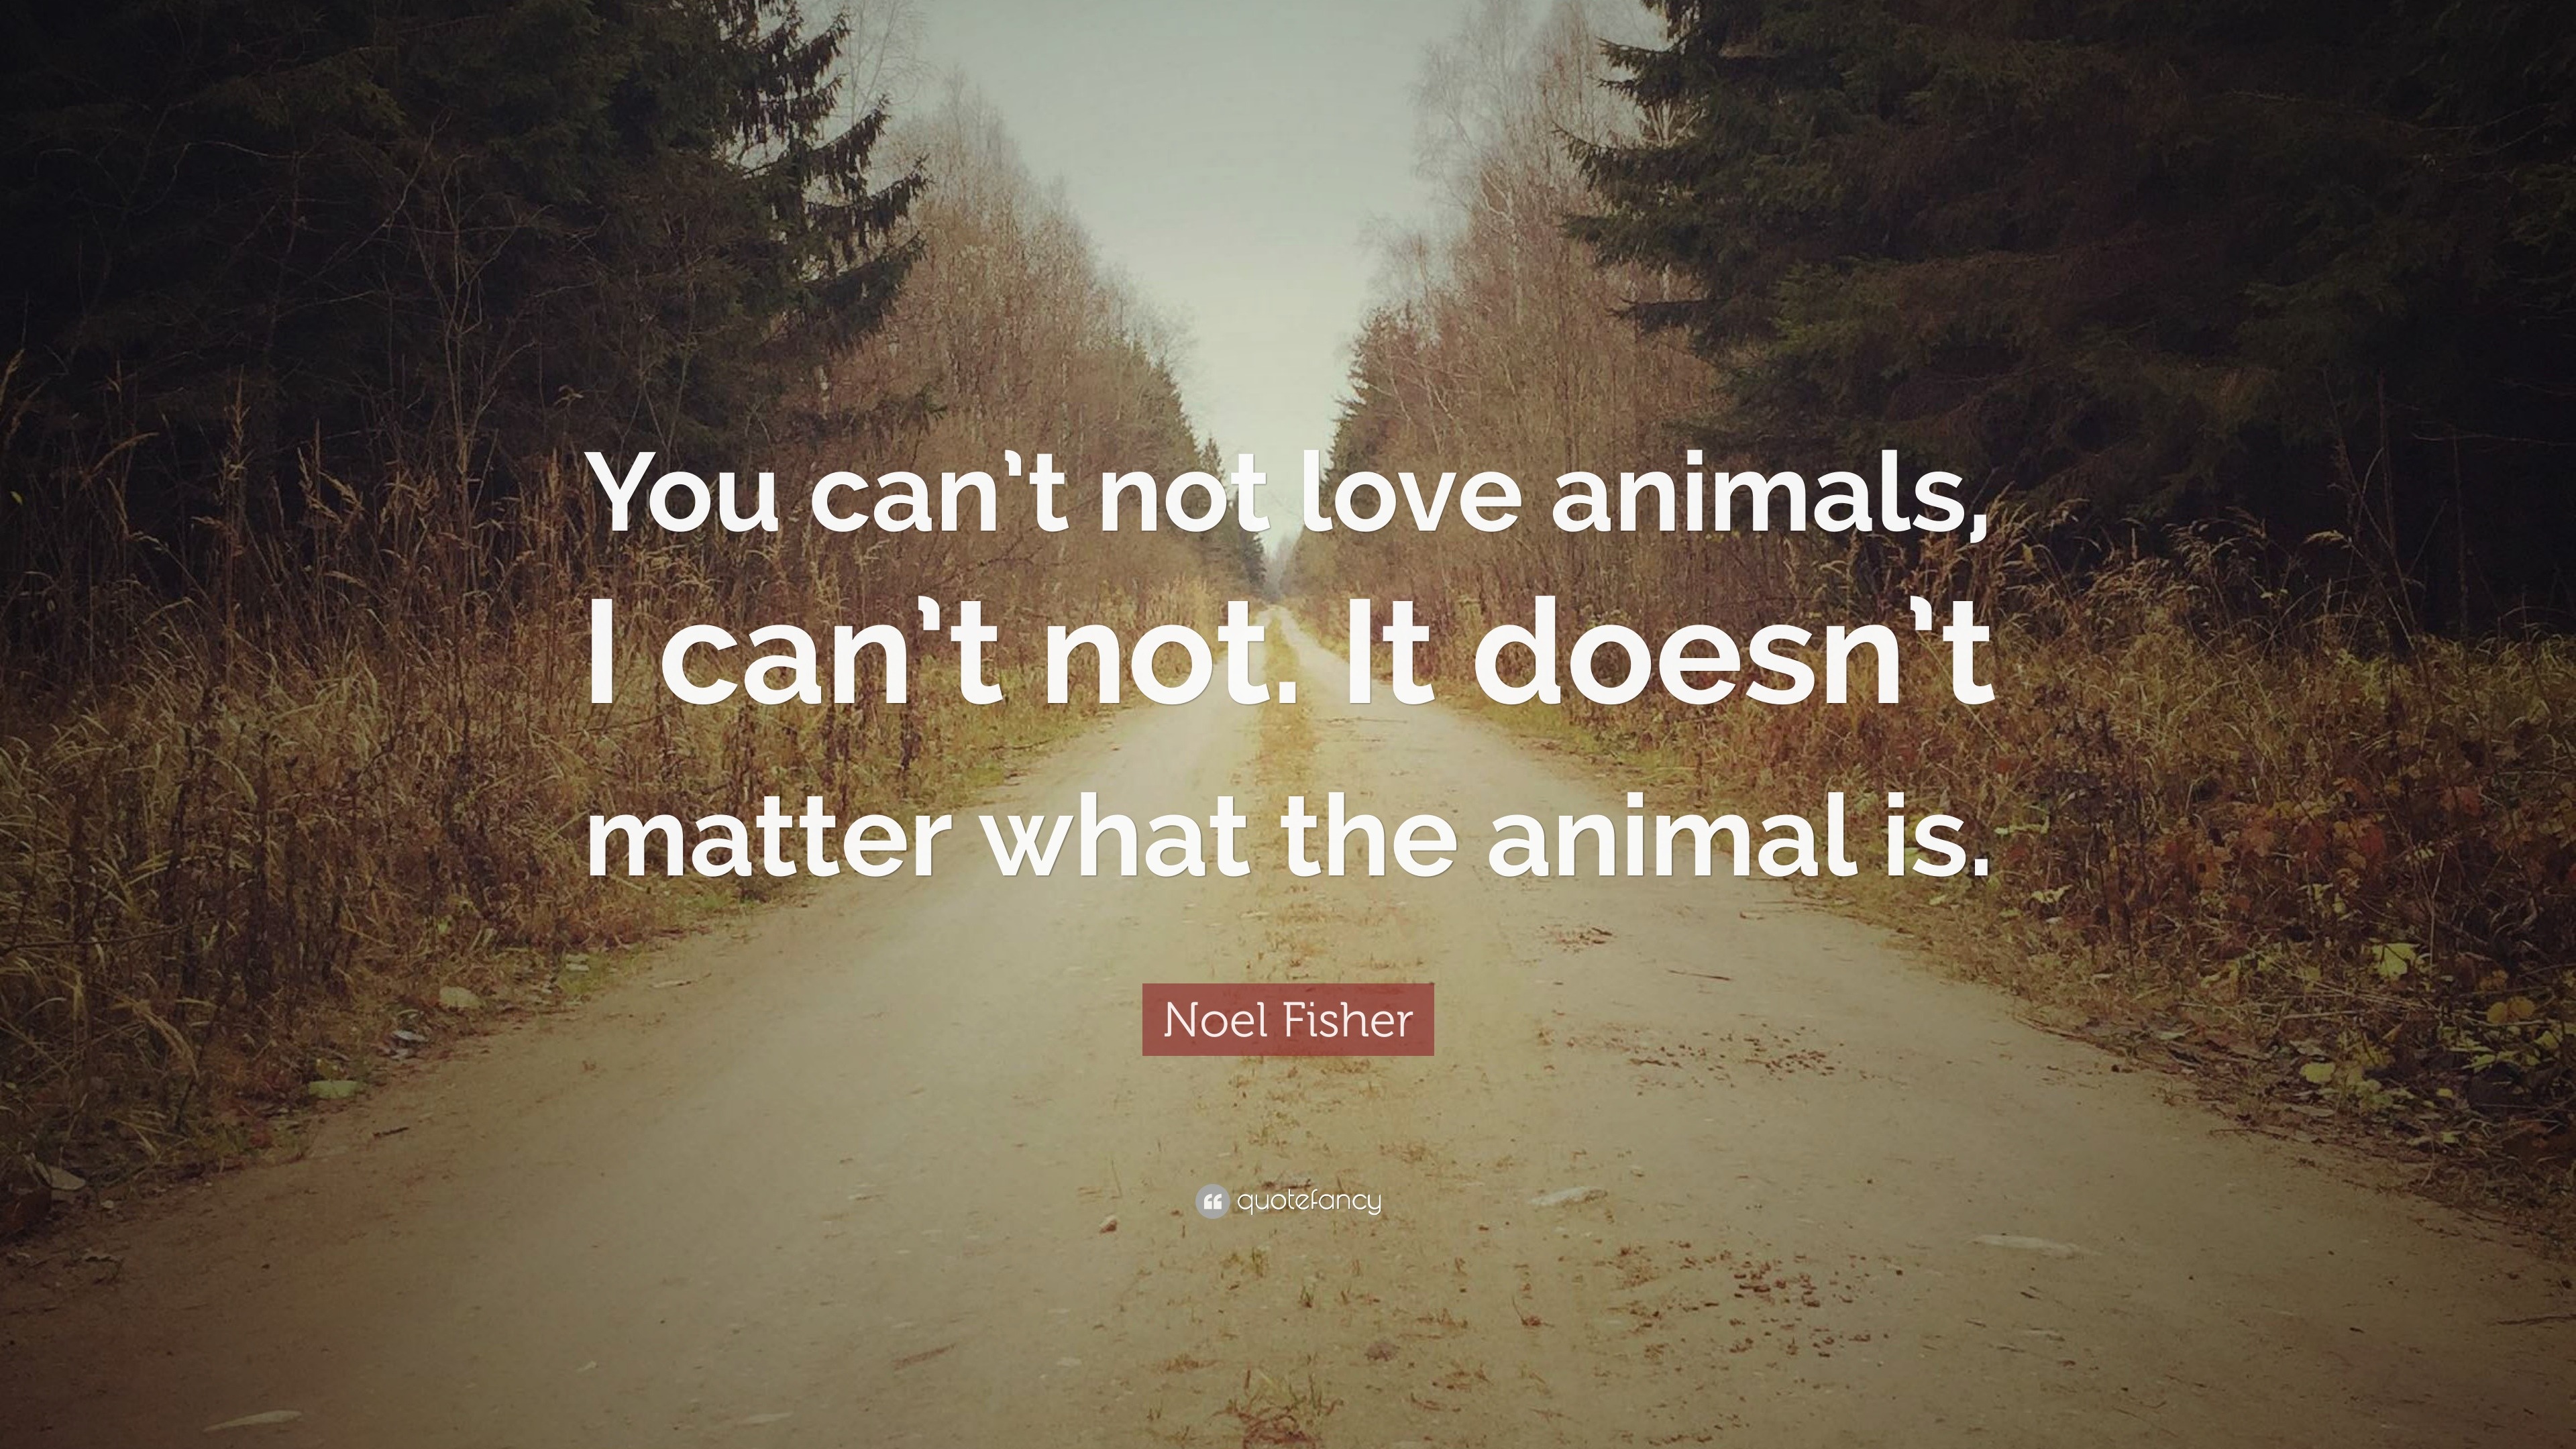 Noel Fisher Quote: “You can’t not love animals, I can’t not. It doesn’t